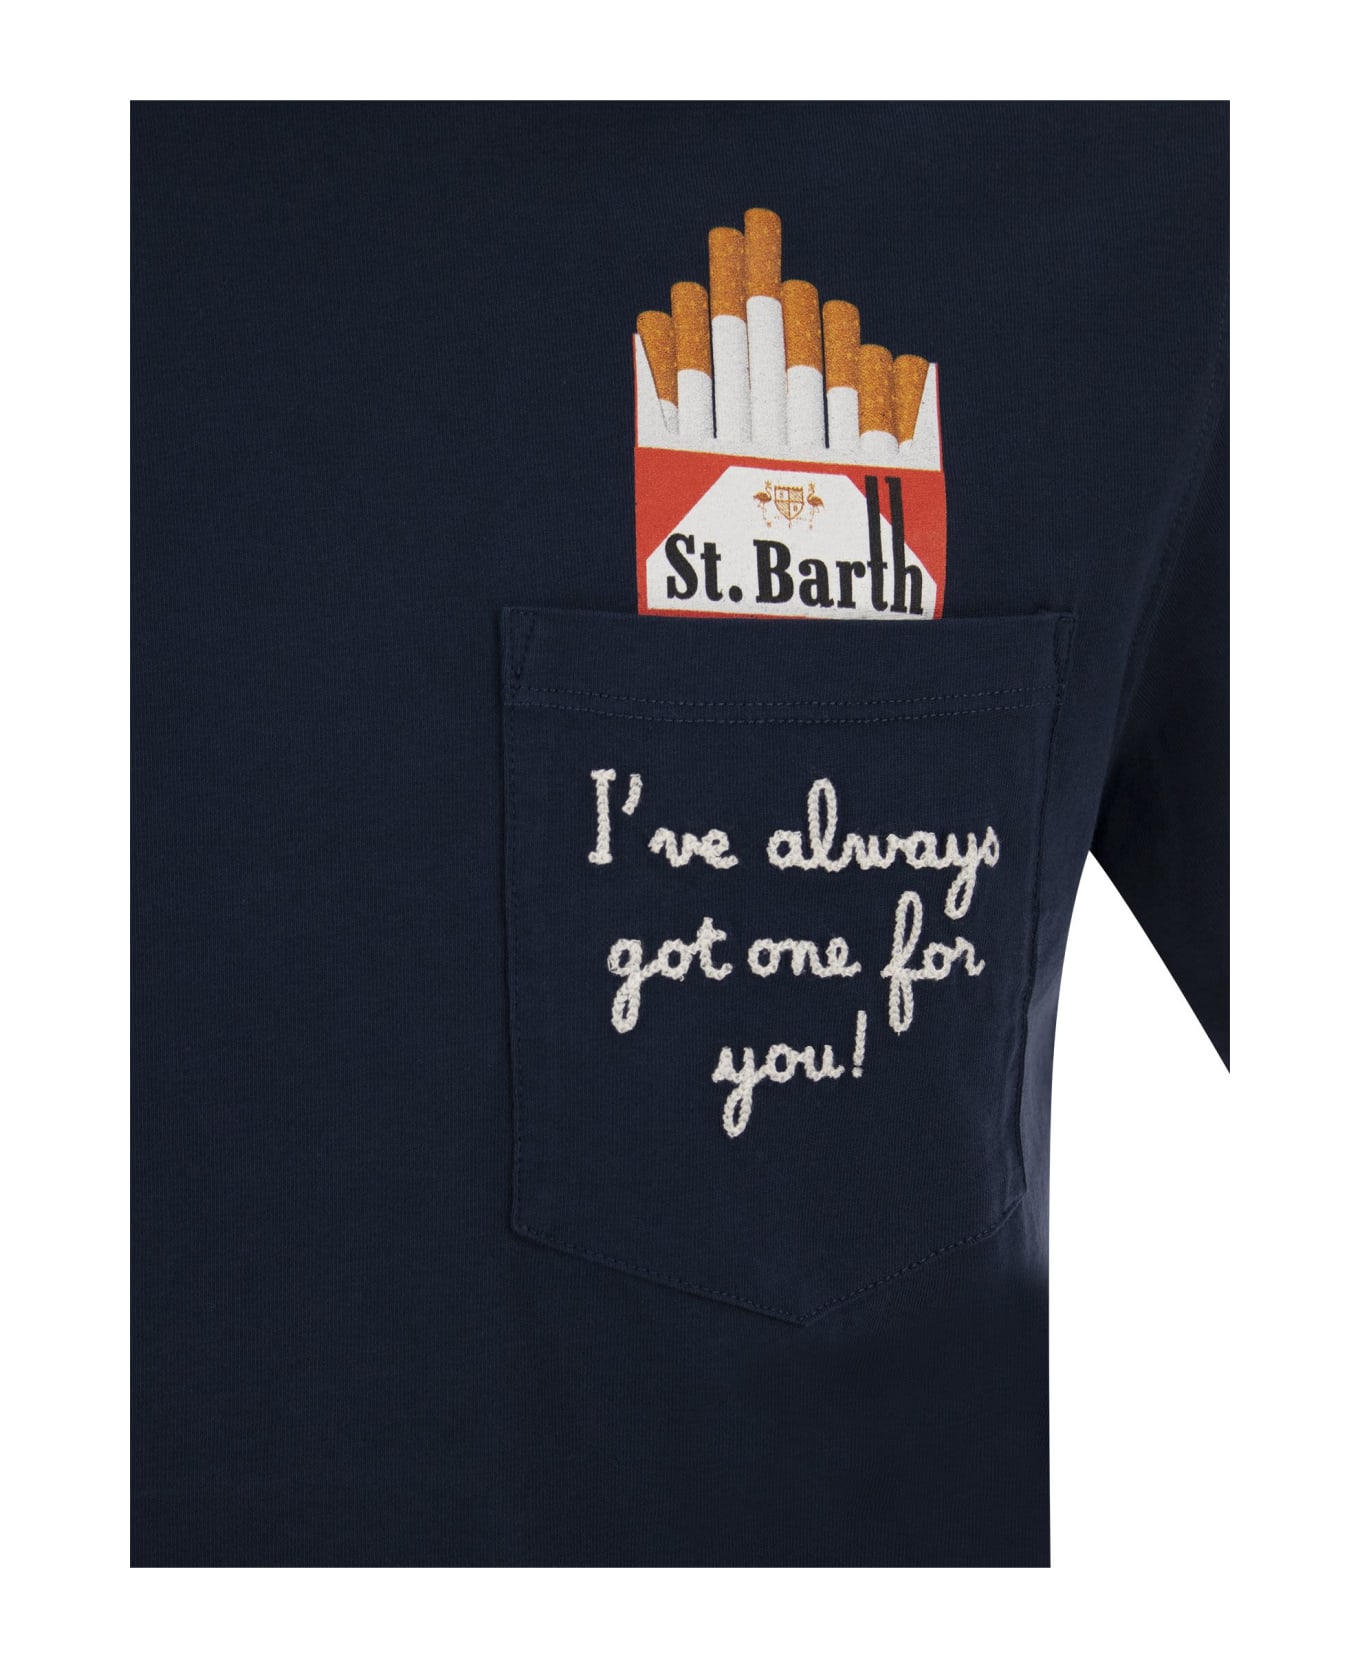 MC2 Saint Barth Cigarette T-shirt With Embroidery On Pocket - Blue